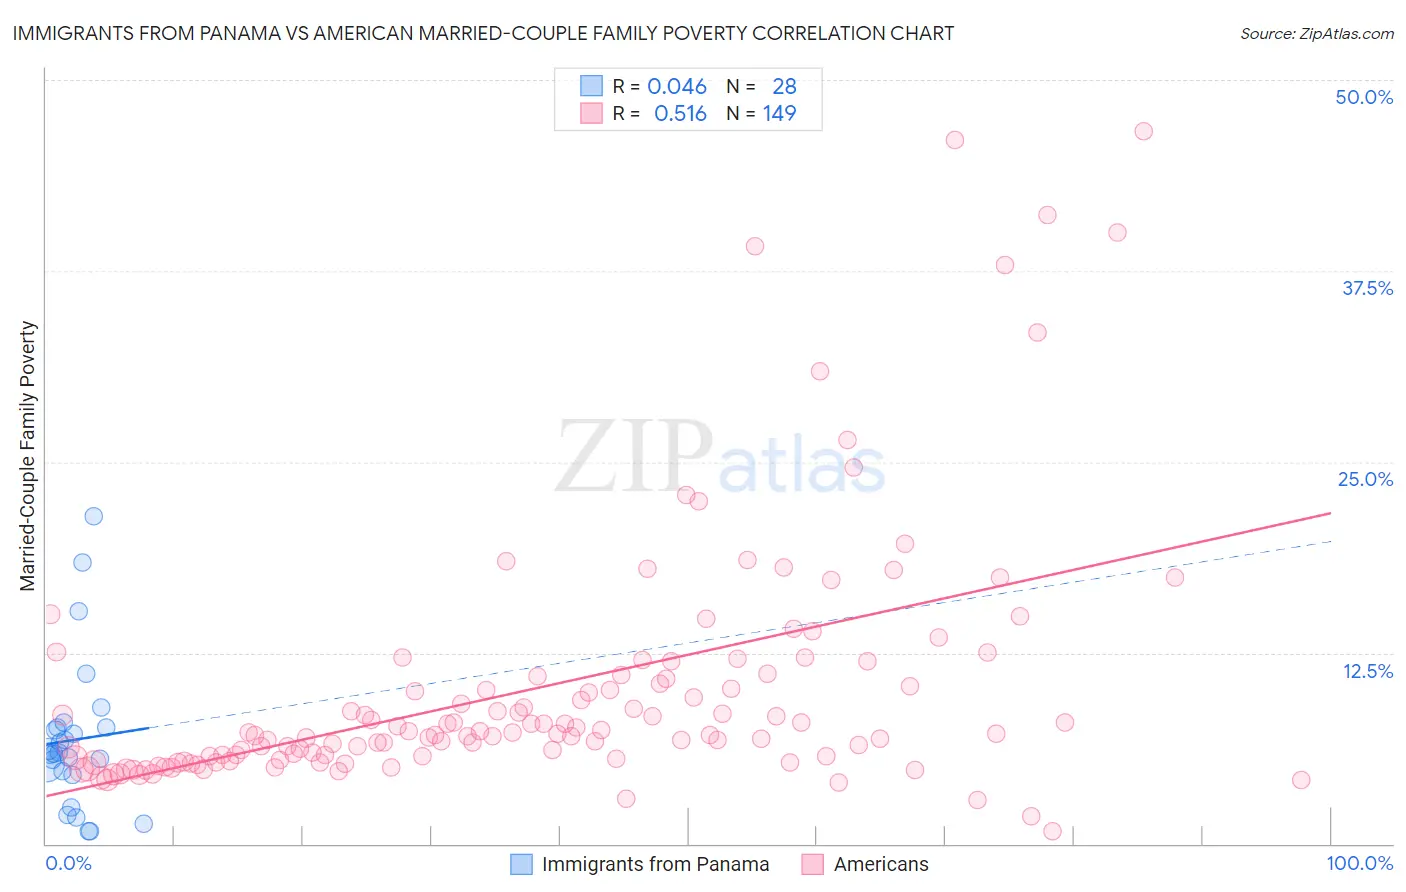 Immigrants from Panama vs American Married-Couple Family Poverty